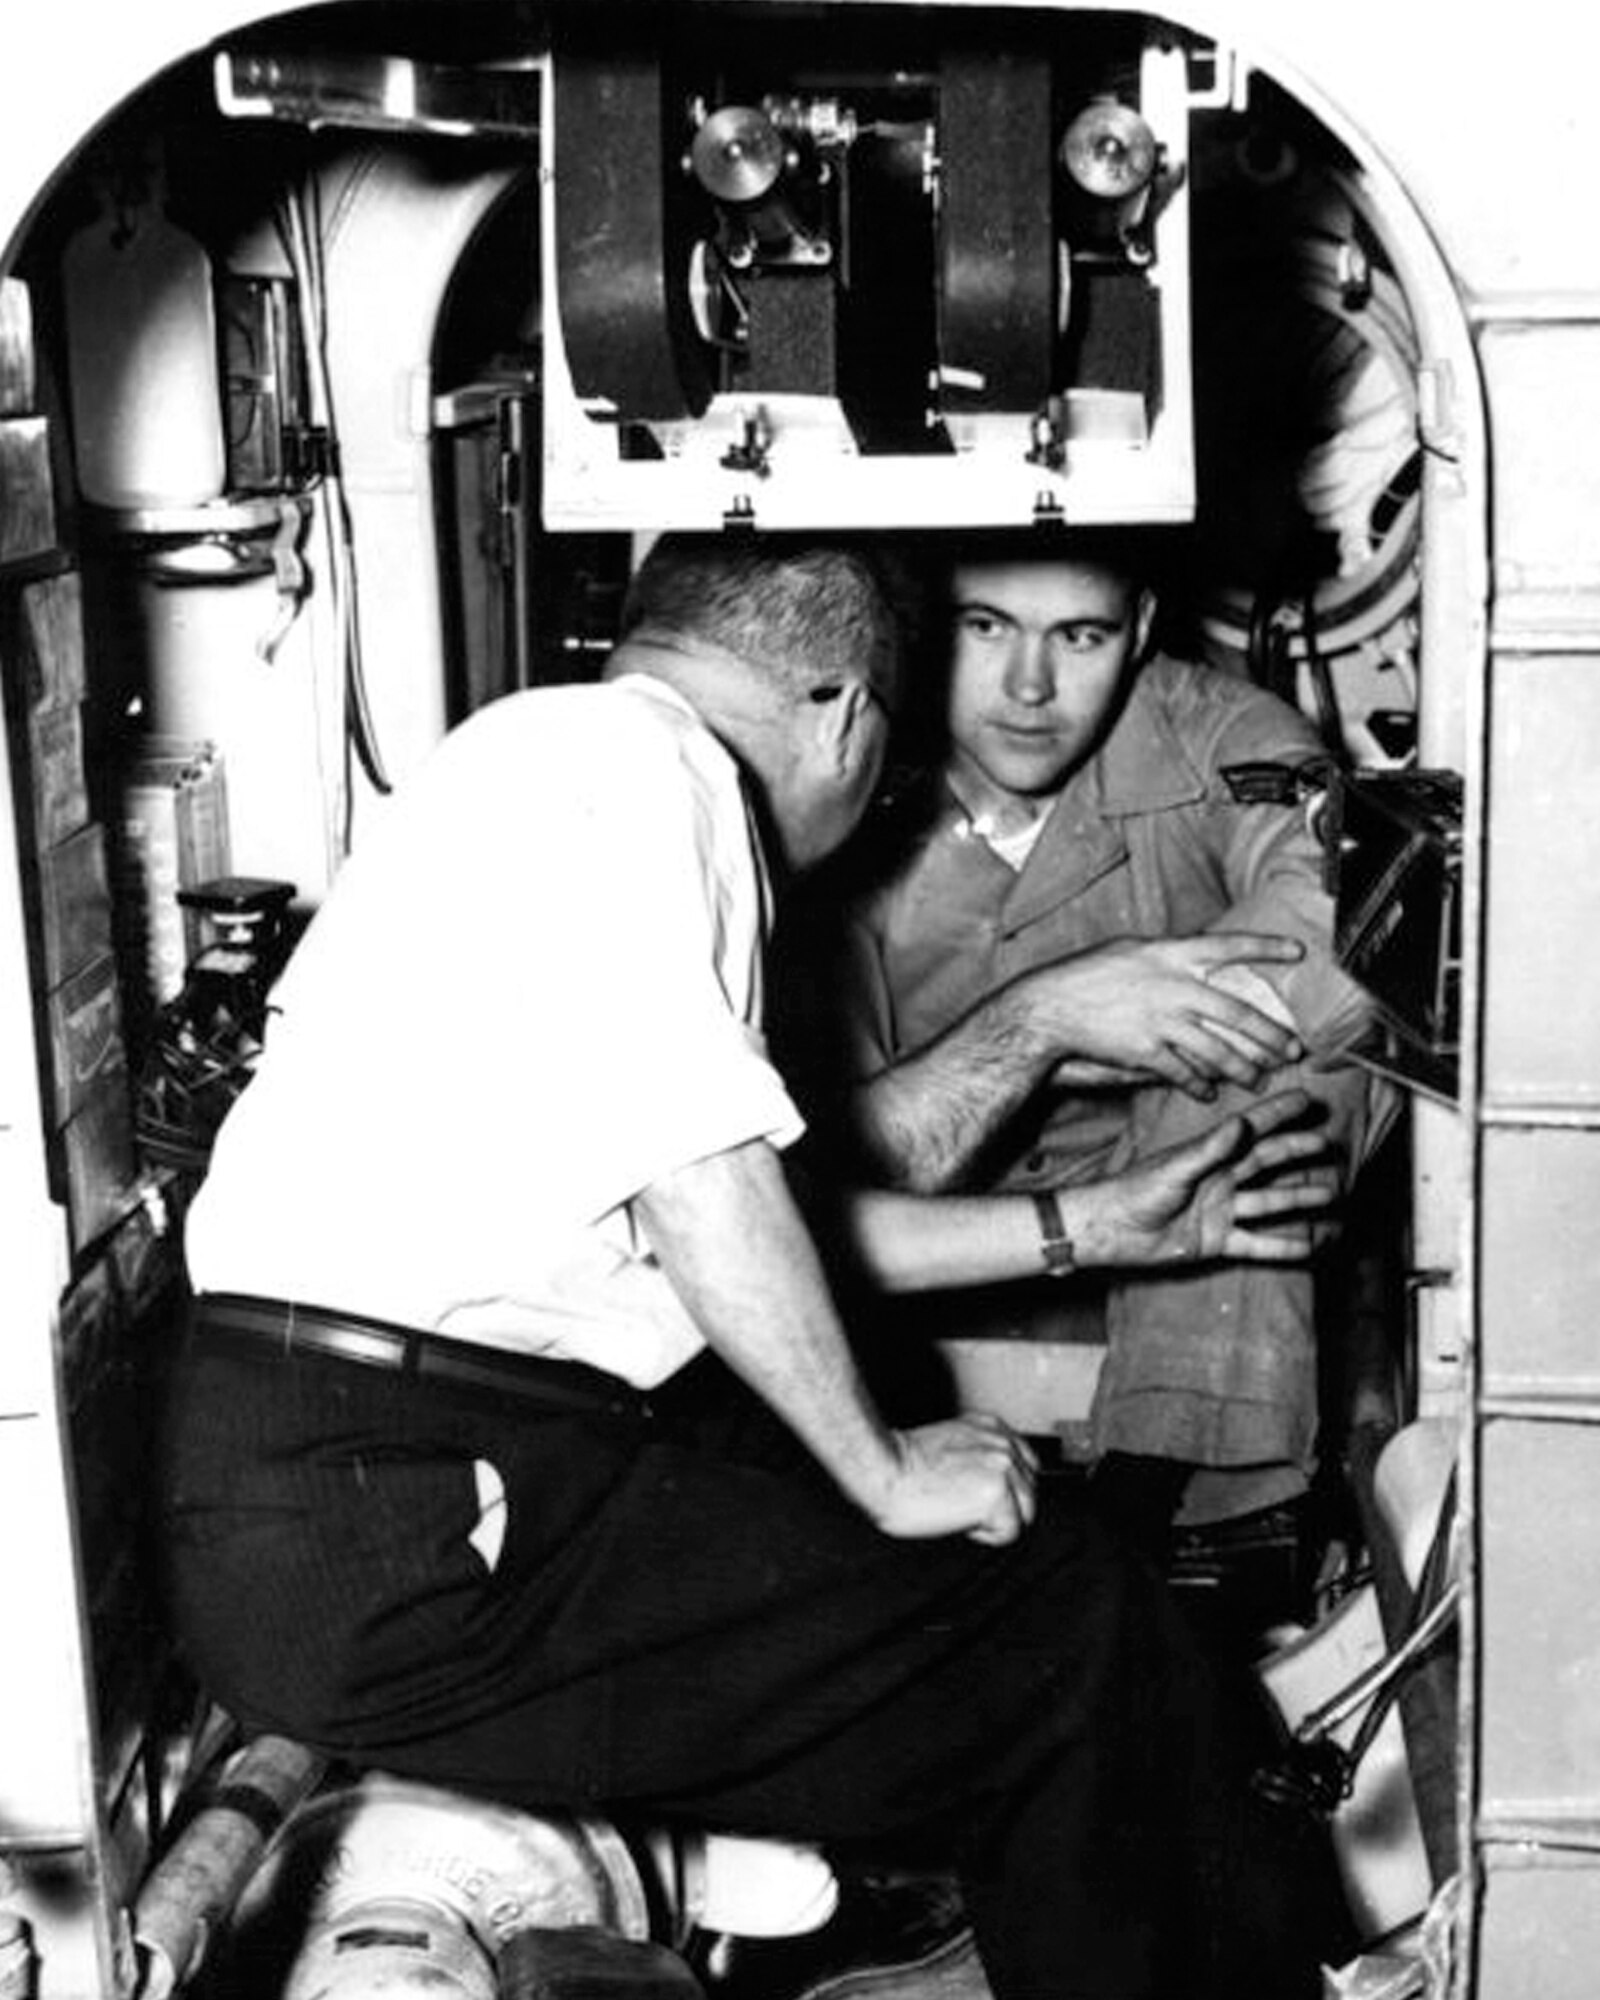 Airman 1st Class Donald G. Farrell, talks with Fenten Duepner, an electronic engineer at the Air Force School of Aviation Medicine, during a pre-ascension briefing at Randolph Air Force Base. Farrell is inside the small shell in which he began a seven-day journey into the unknown on Feb. 9, 1958. The space cabin is designed to duplicate the conditions Farrell might encounter if he were on a trip to the moon. 

Photo Credit, United Press, Feb. 9, 1958
